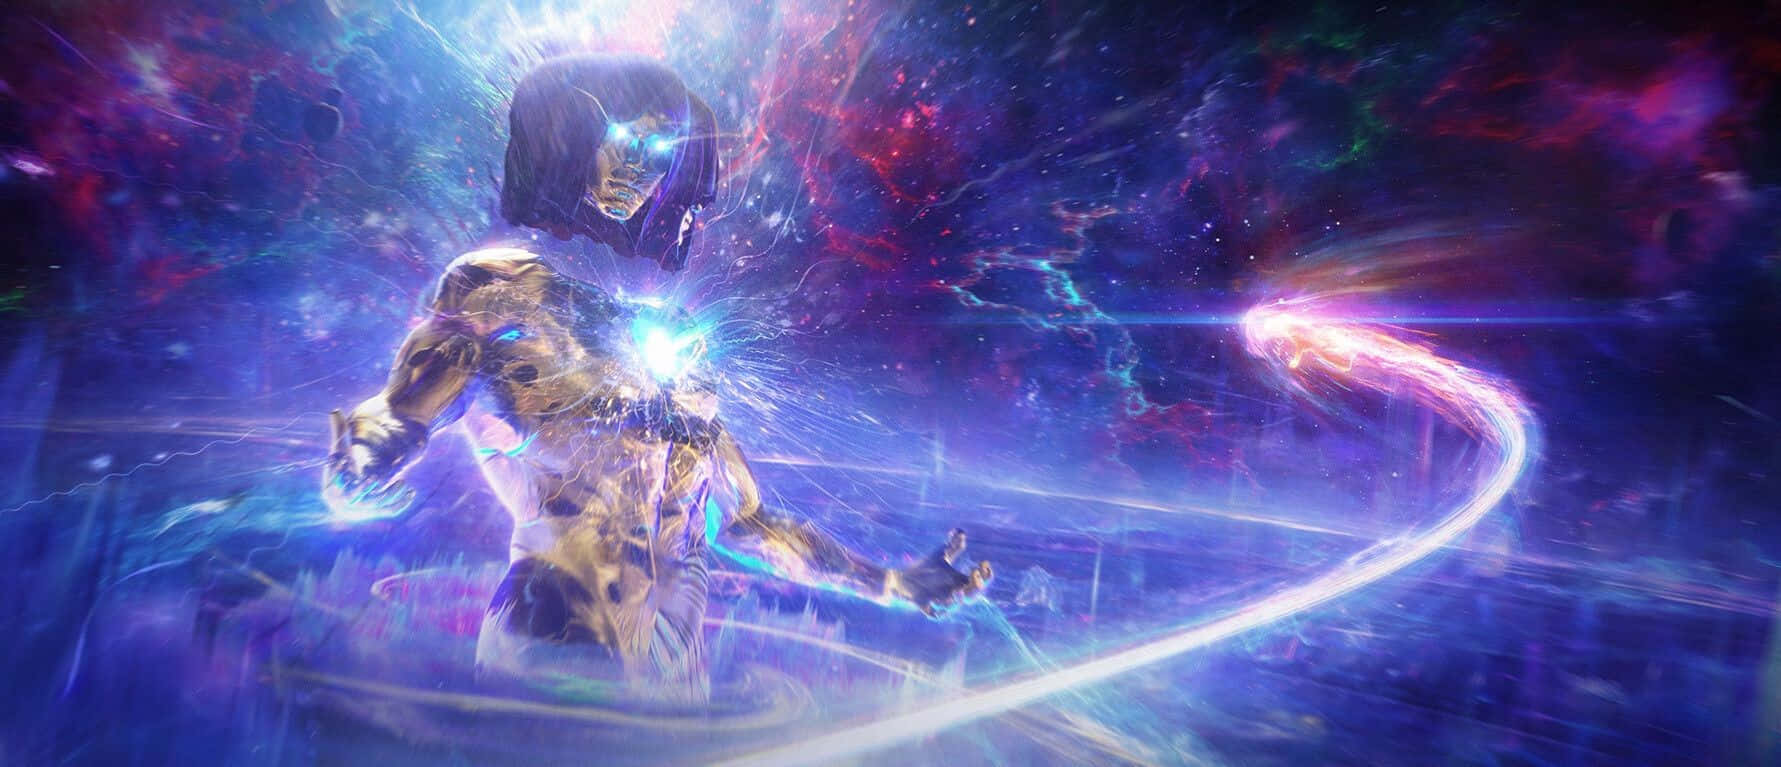 The Living Tribunal: Protector of the Multiverse Wallpaper